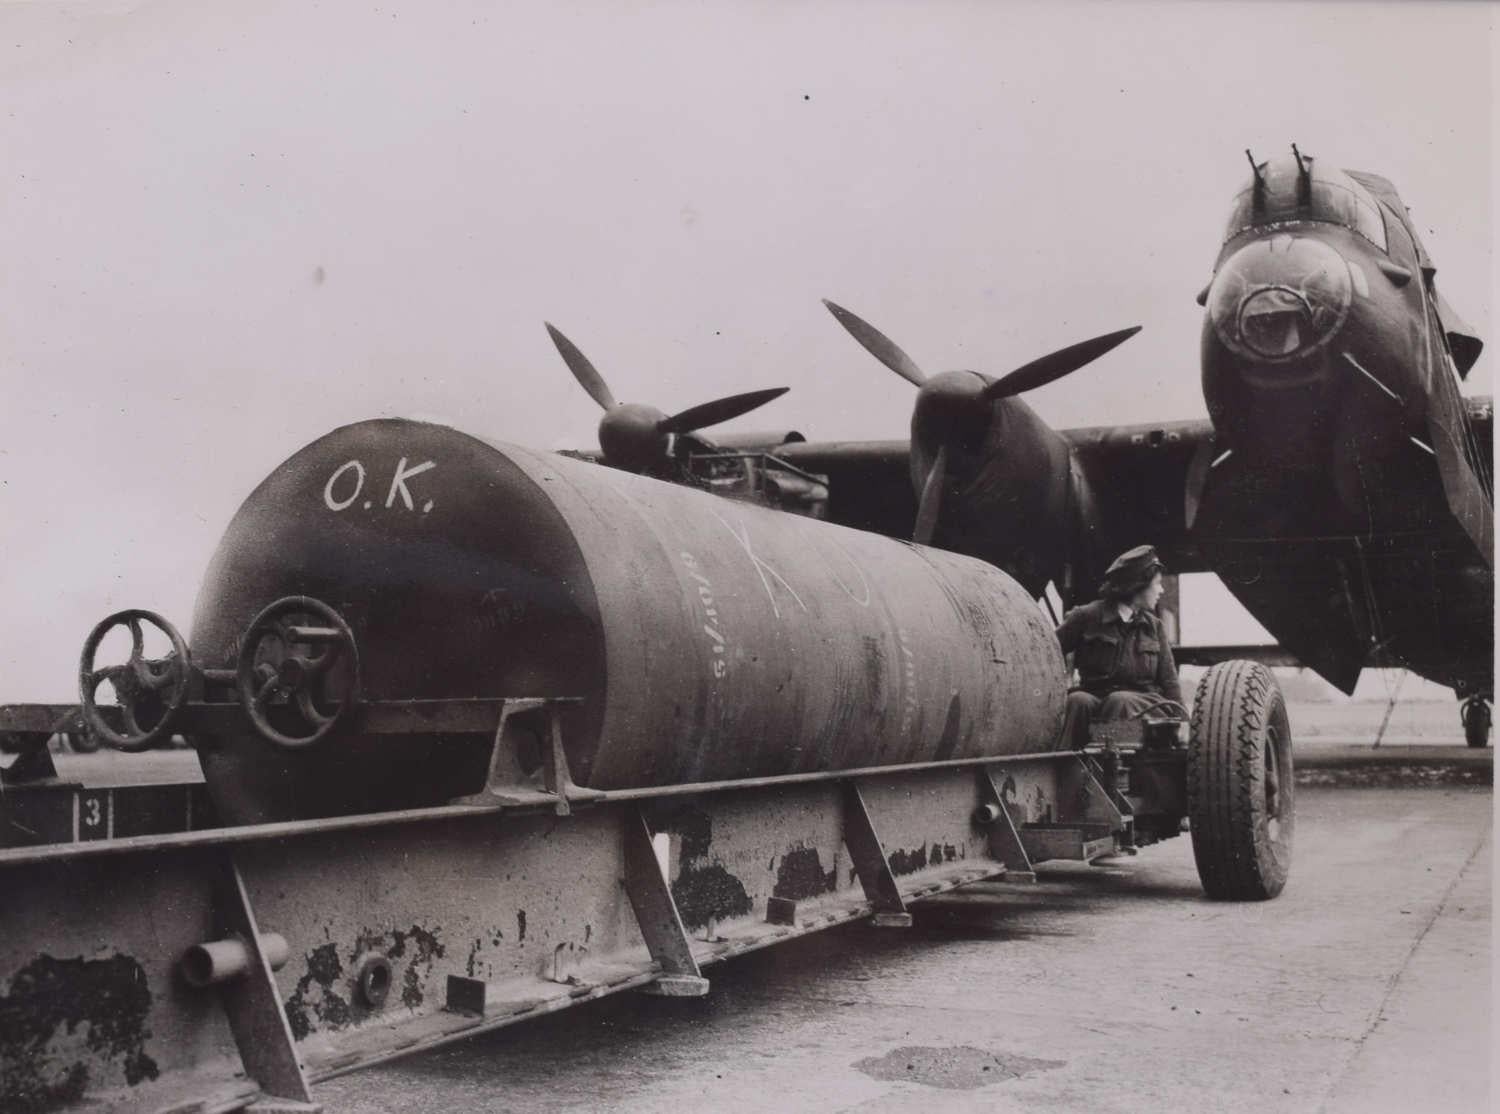 Unknown Black and White Photograph - Avro Lancaster Bomber with 8000lb cookie bomb original press photograph 1943